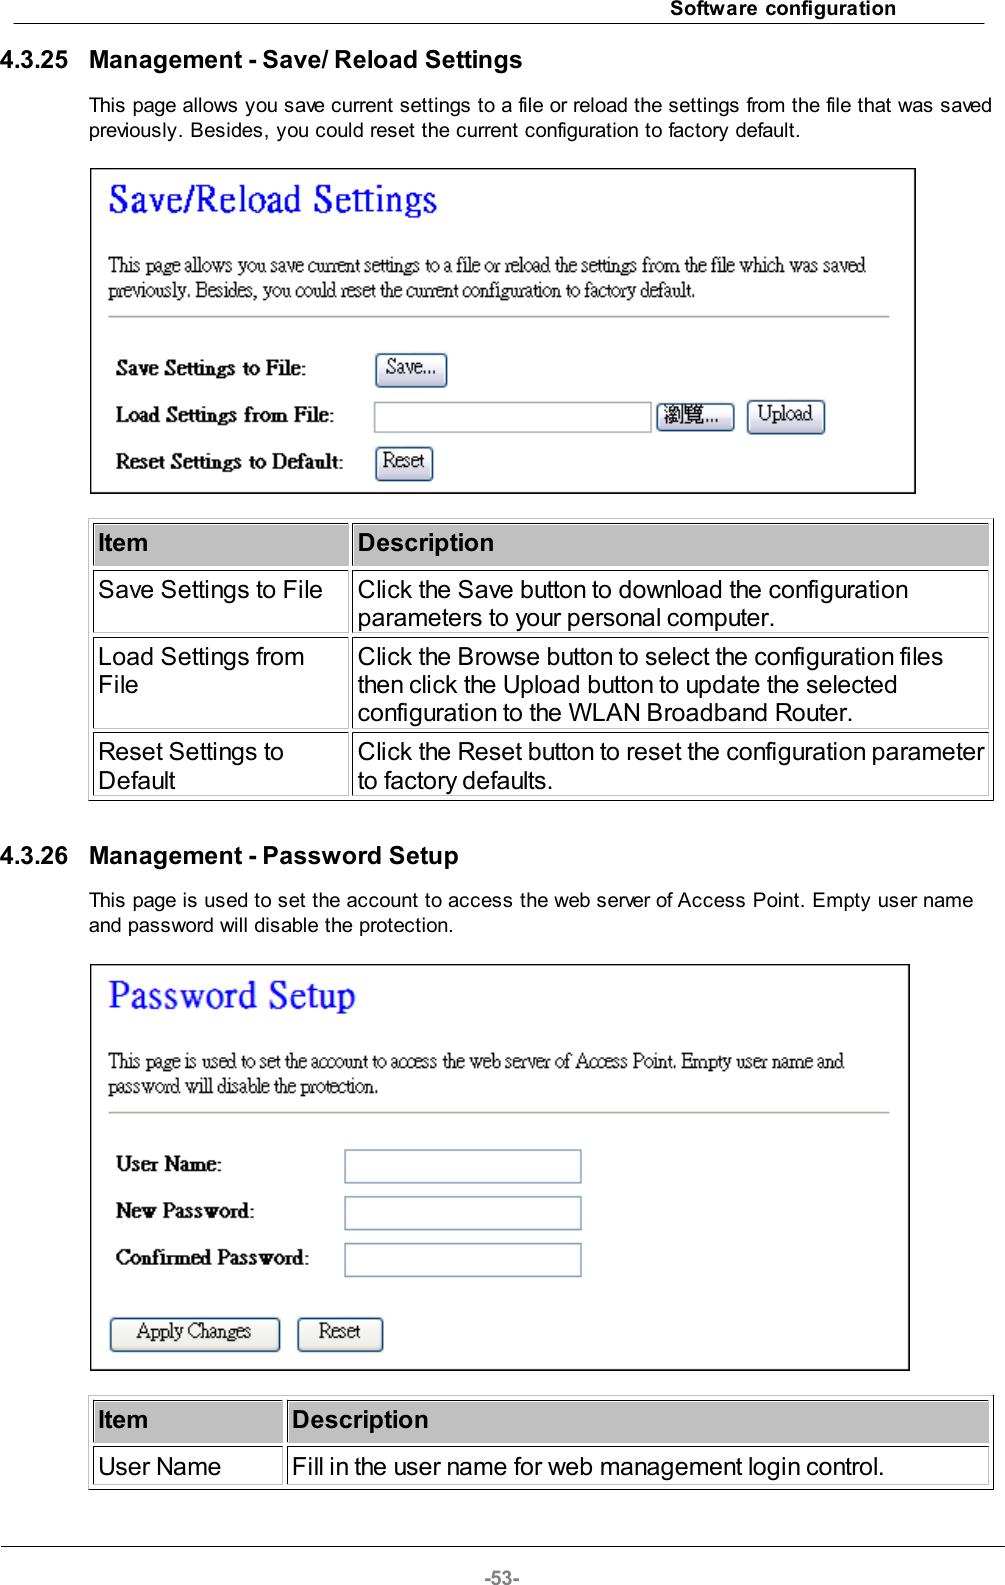 Software configuration-53-4.3.25 Management - Save/ Reload SettingsThis page allows you save current settings to a file or reload the settings from the file that was savedpreviously. Besides, you could reset the current configuration to factory default.ItemDescriptionSave Settings to FileClick the Save button to download the configurationparameters to your personal computer.Load Settings fromFileClick the Browse button to select the configuration filesthen click the Upload button to update the selectedconfiguration to the WLAN Broadband Router.Reset Settings toDefaultClick the Reset button to reset the configuration parameterto factory defaults.4.3.26 Management - Password SetupThis page is used to set the account to access the web server of Access Point. Empty user nameand password will disable the protection.ItemDescriptionUser NameFill in the user name for web management login control.